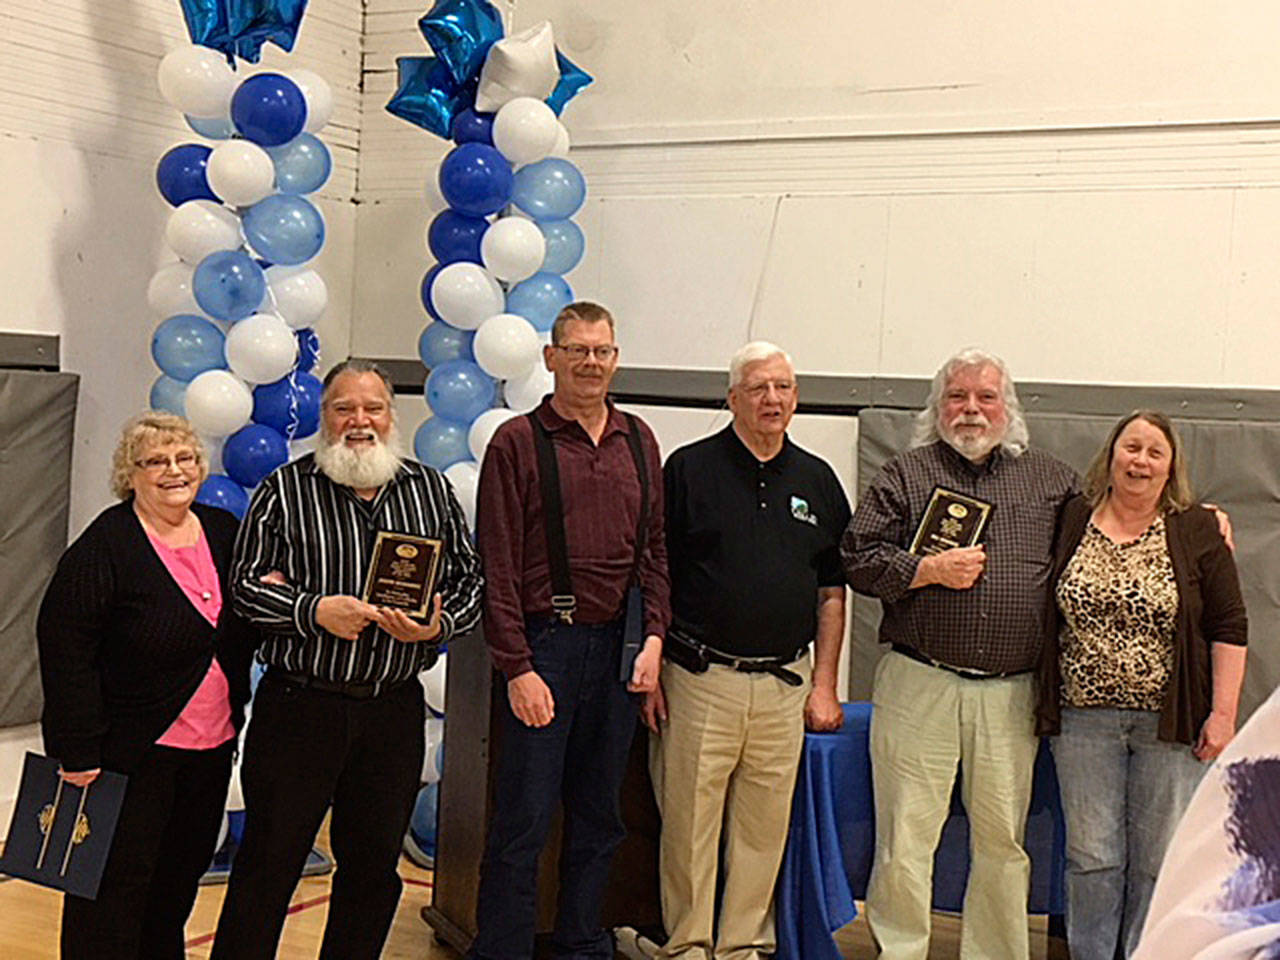 The City of Pacific recently honored some of its top volunteers: from left, Shirley Thomson, Joseph Hernandez, Brian Perkins, Frank Emrich, Bill Bergman and Terry Fahrenkrug. Not picture is John Baxter. COURTESY PHOTO